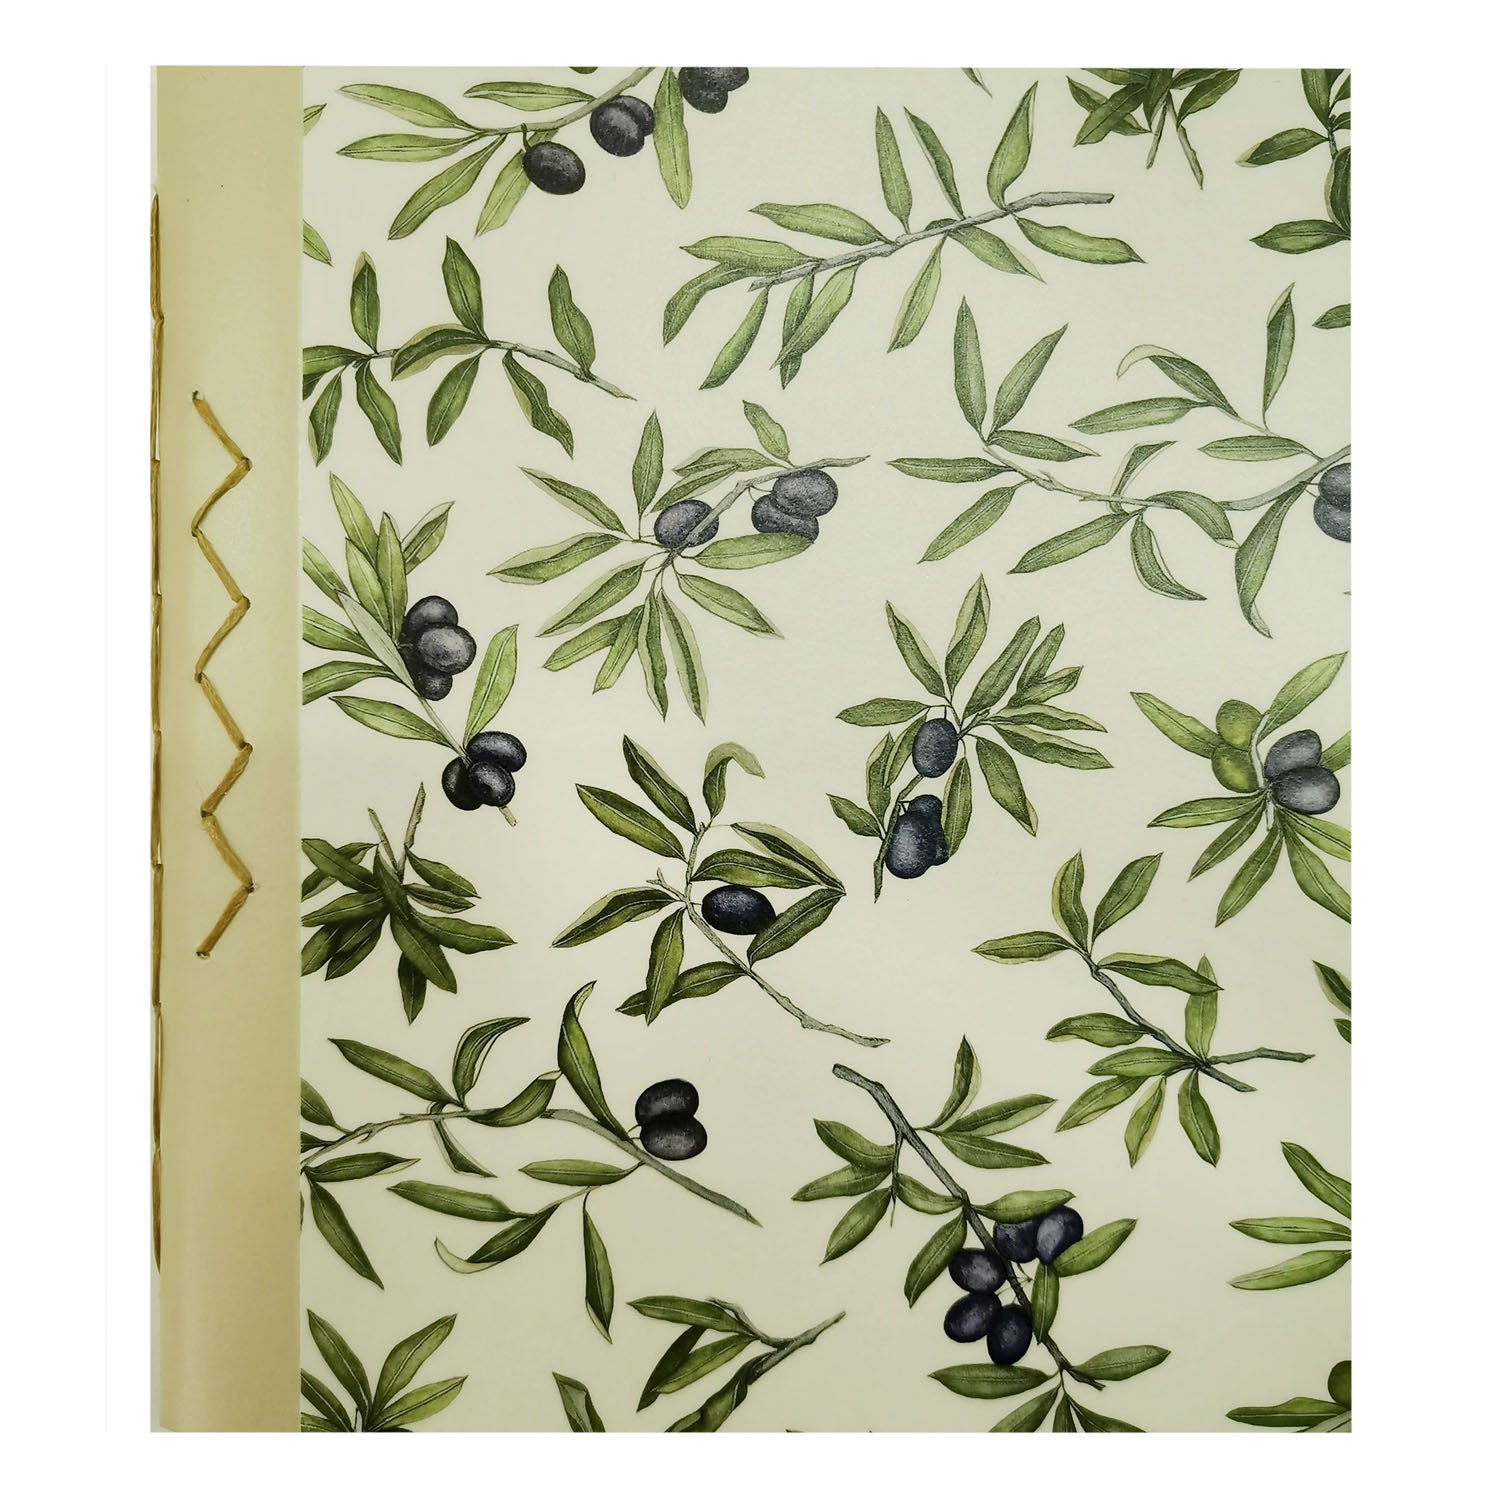 Handmade notebook - Olive branches